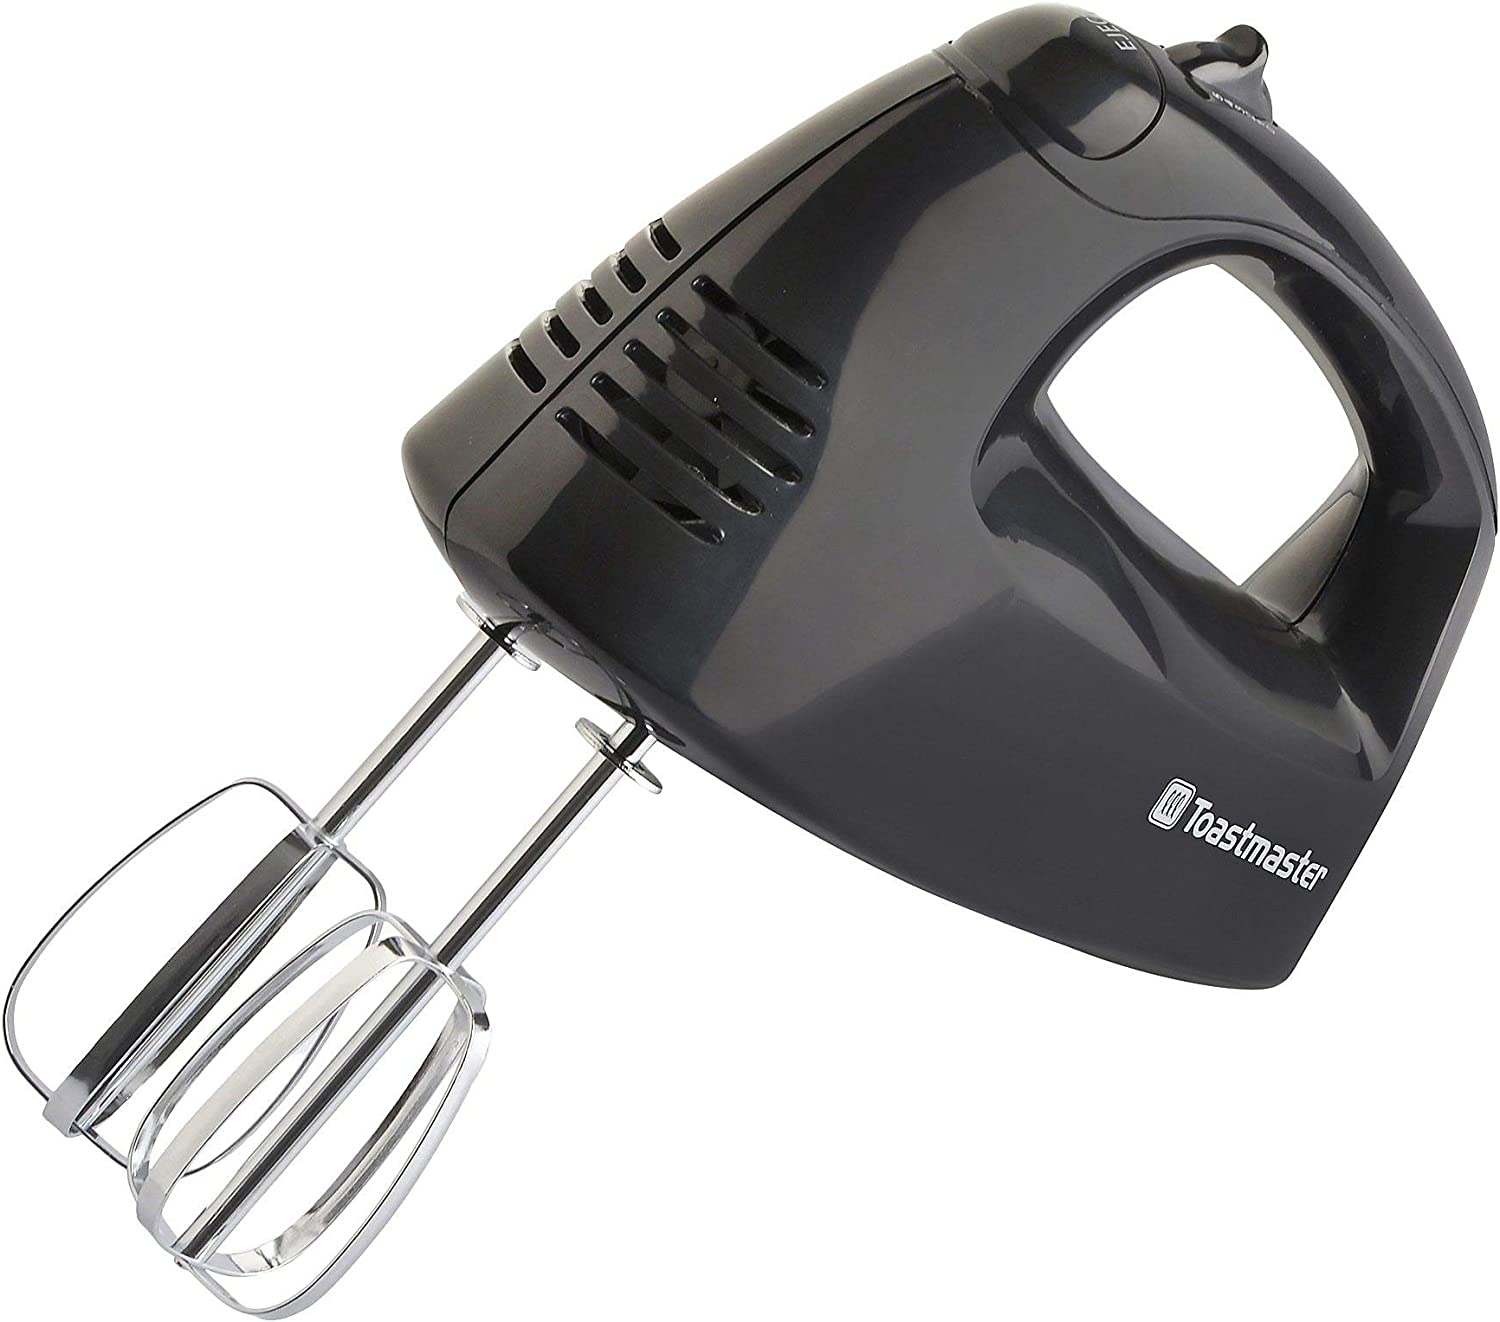 Toastmaster 5 Speed Hand Mixer – TM108HM Import To Shop ×Product customization General Description Gallery Reviews Variations